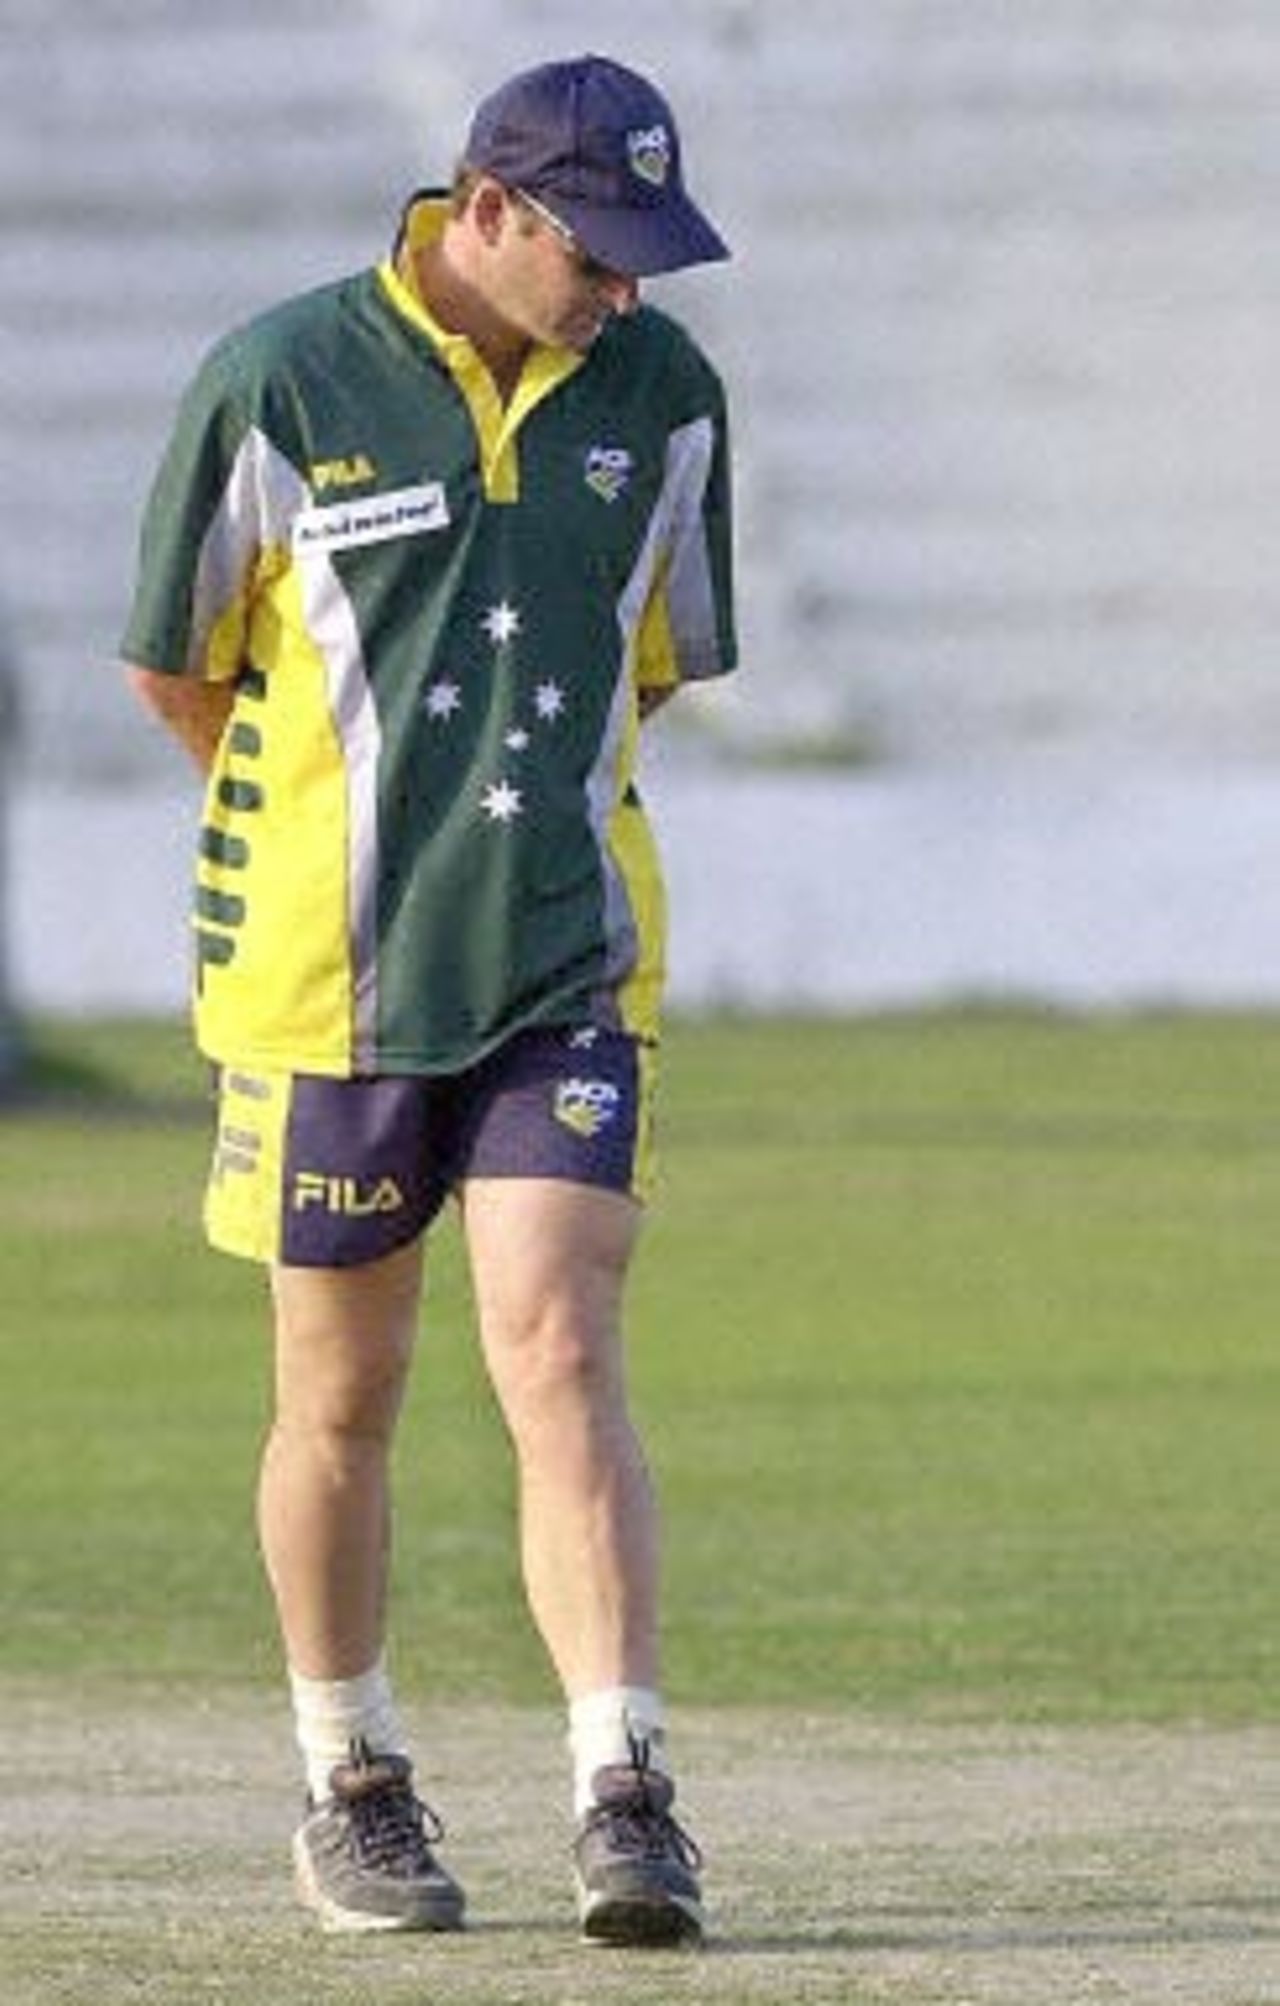 Australian star batsman Mark Waugh inspects the pitch at the Ferozshah Kotla ground in New Delhi during a net-practice session by the Australian team, 04 March 2001. Australia will be playing India's Board President's XI team from 06 March 2001 after having already taken a 1-0 lead in the three Test match series against India.